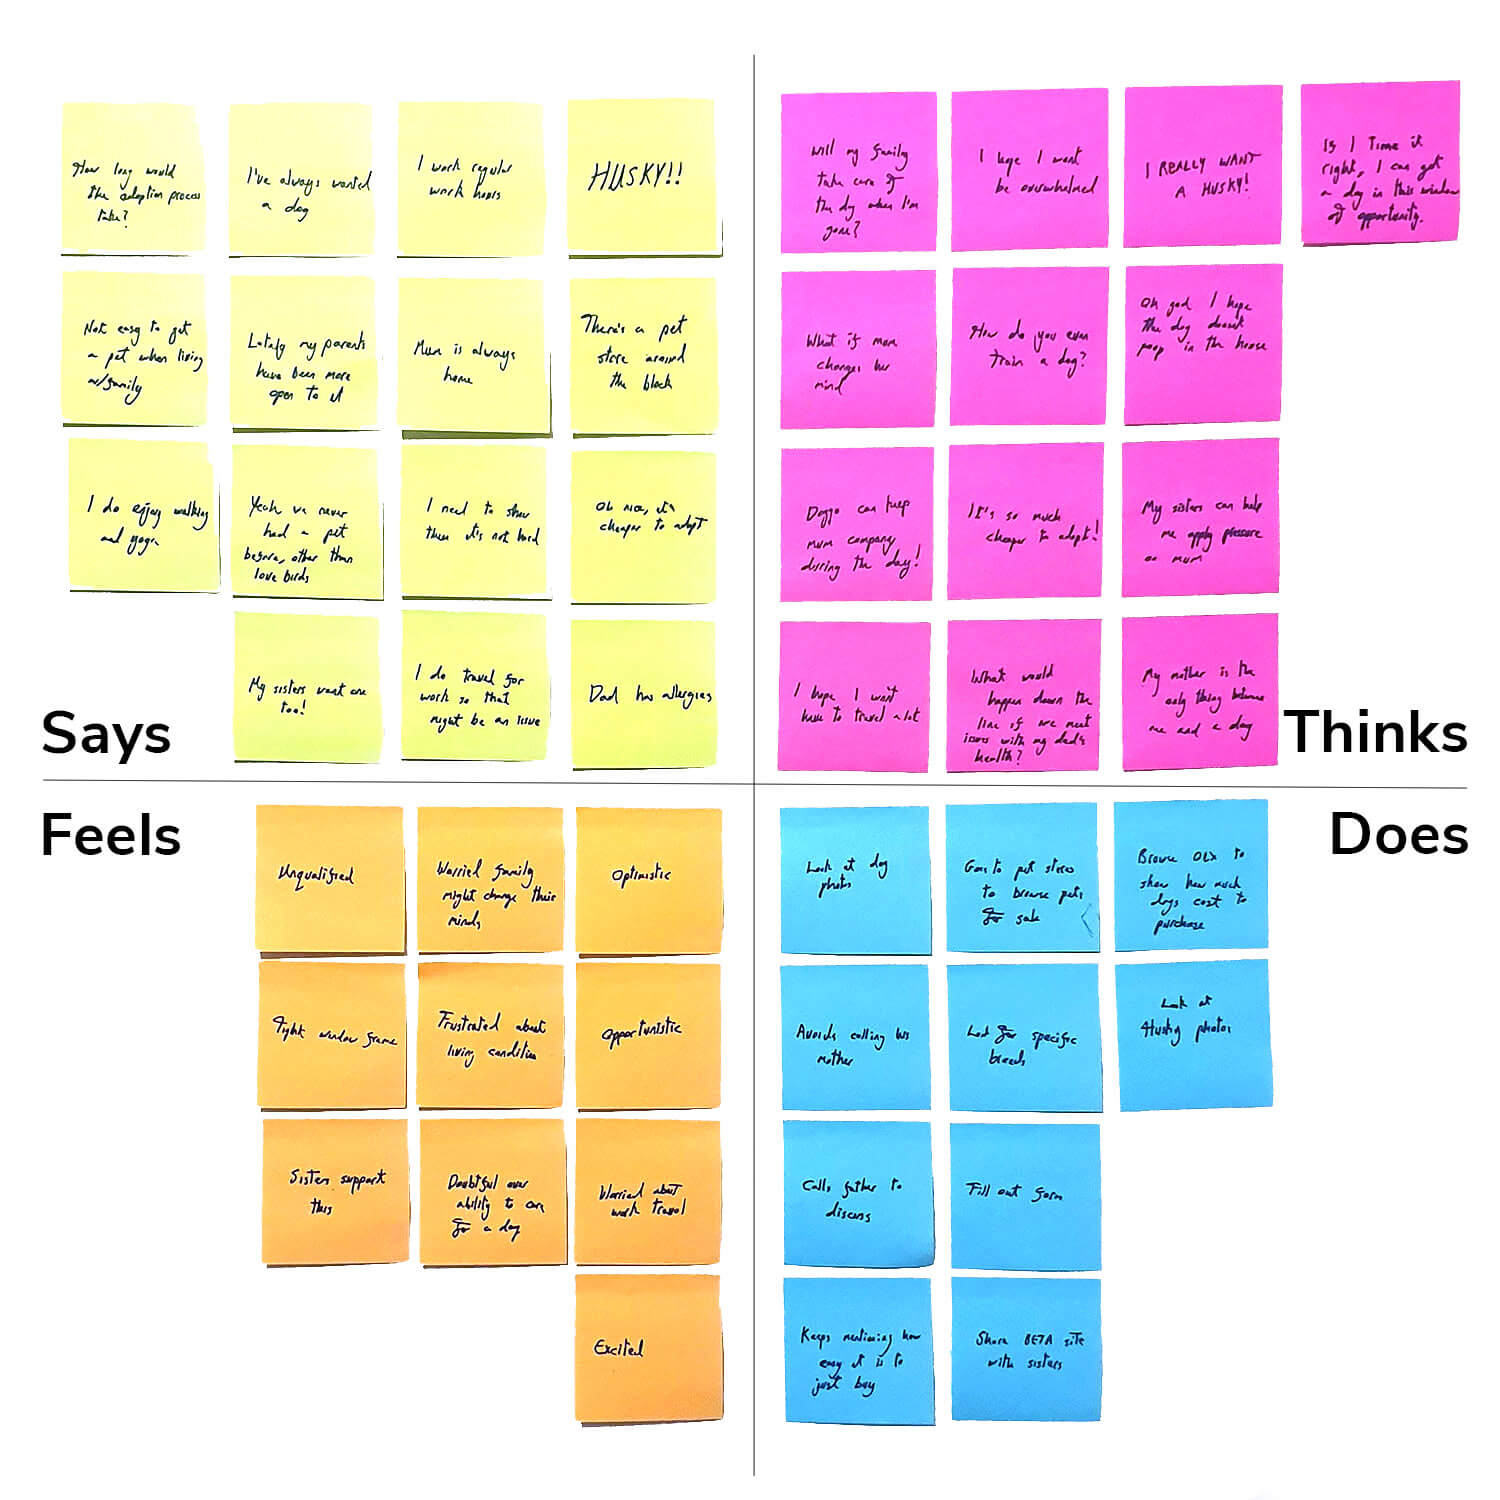 UX User Empathy Map for the Persona Jad